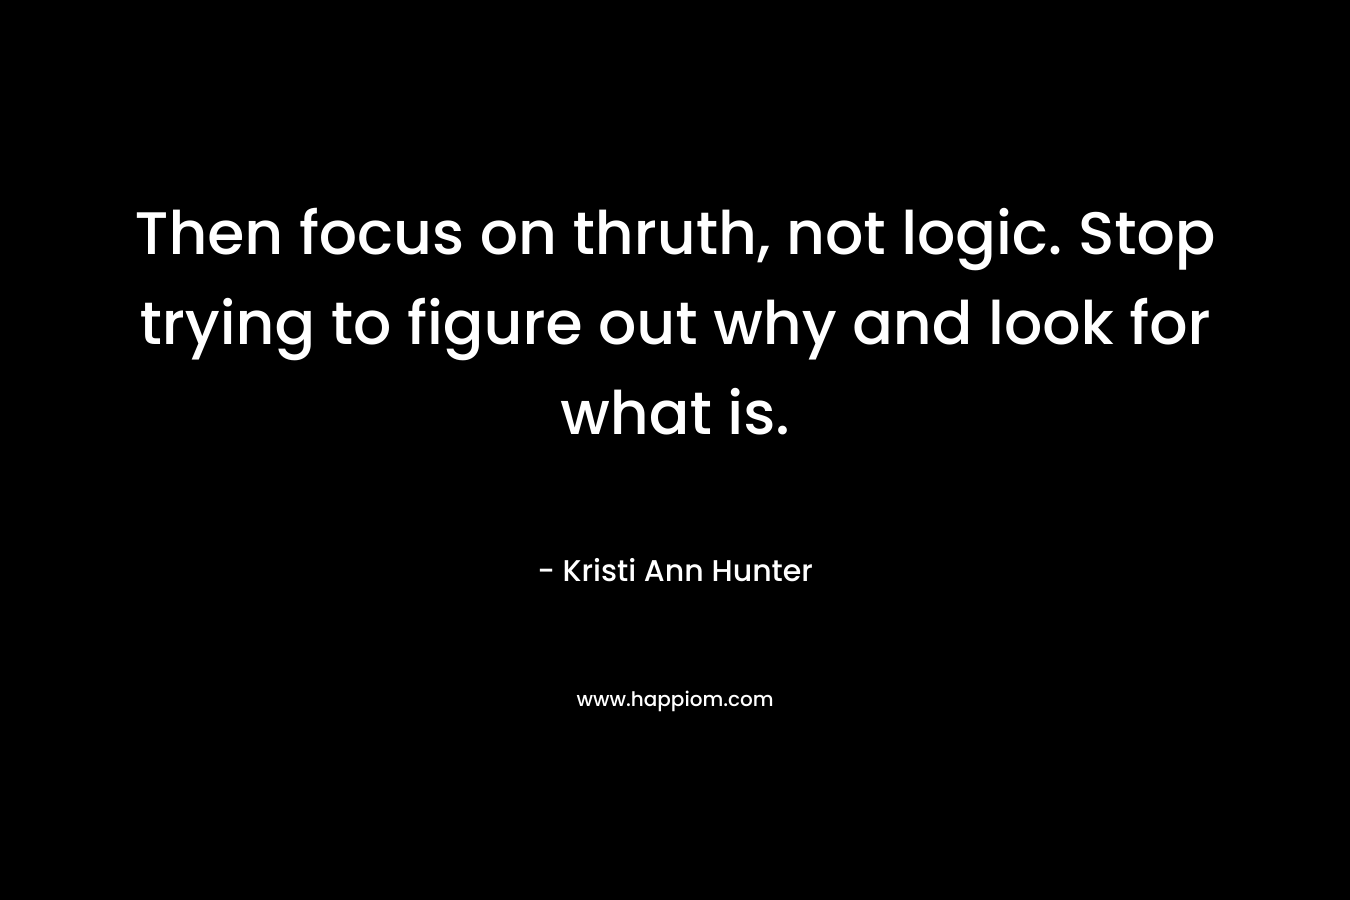 Then focus on thruth, not logic. Stop trying to figure out why and look for what is. – Kristi Ann Hunter